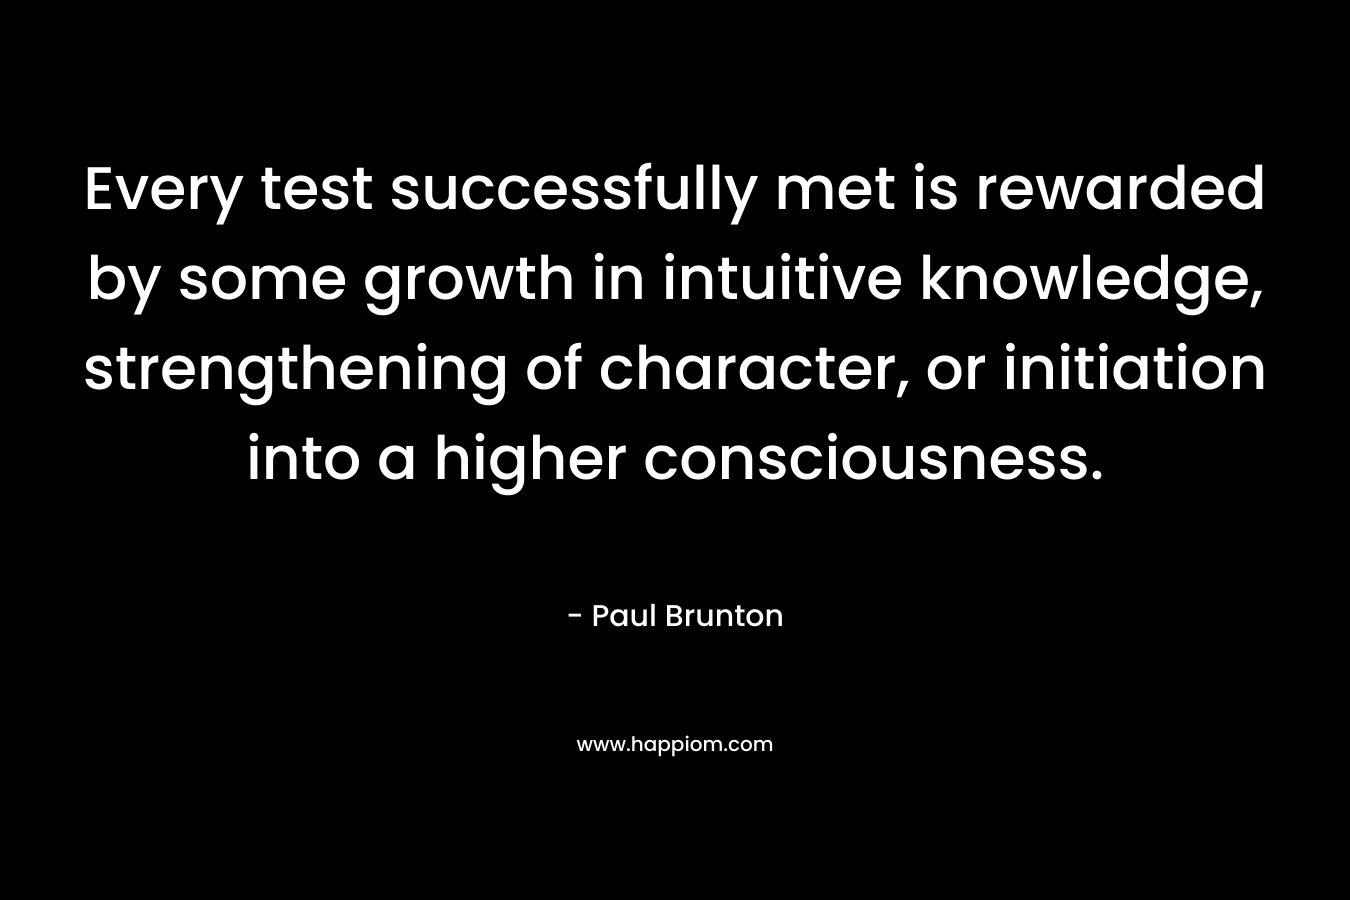 Every test successfully met is rewarded by some growth in intuitive knowledge, strengthening of character, or initiation into a higher consciousness.